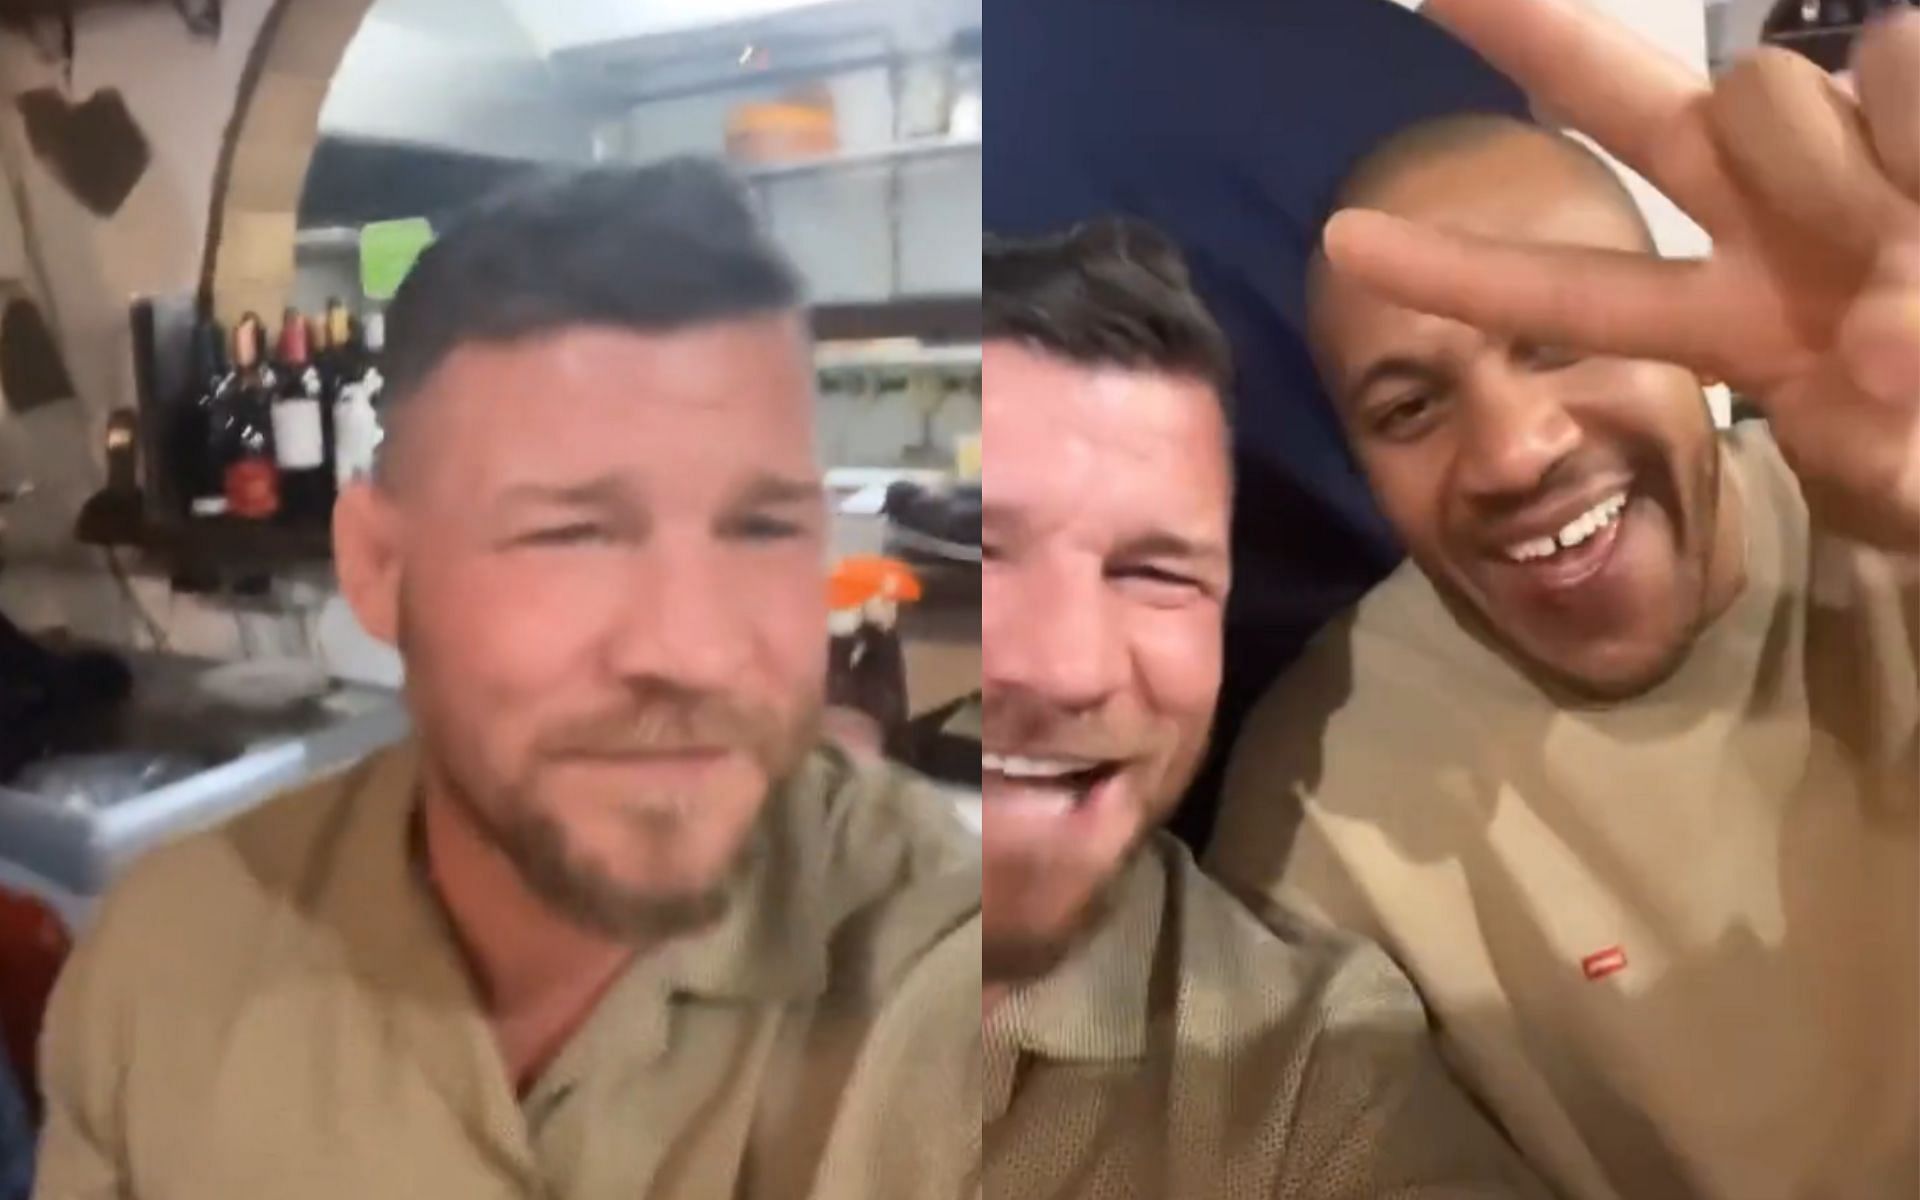 Screenshots of Michael Bisping and Ciryl Gane together in Tenerife [Images courtesy: @bisping on Twitter]